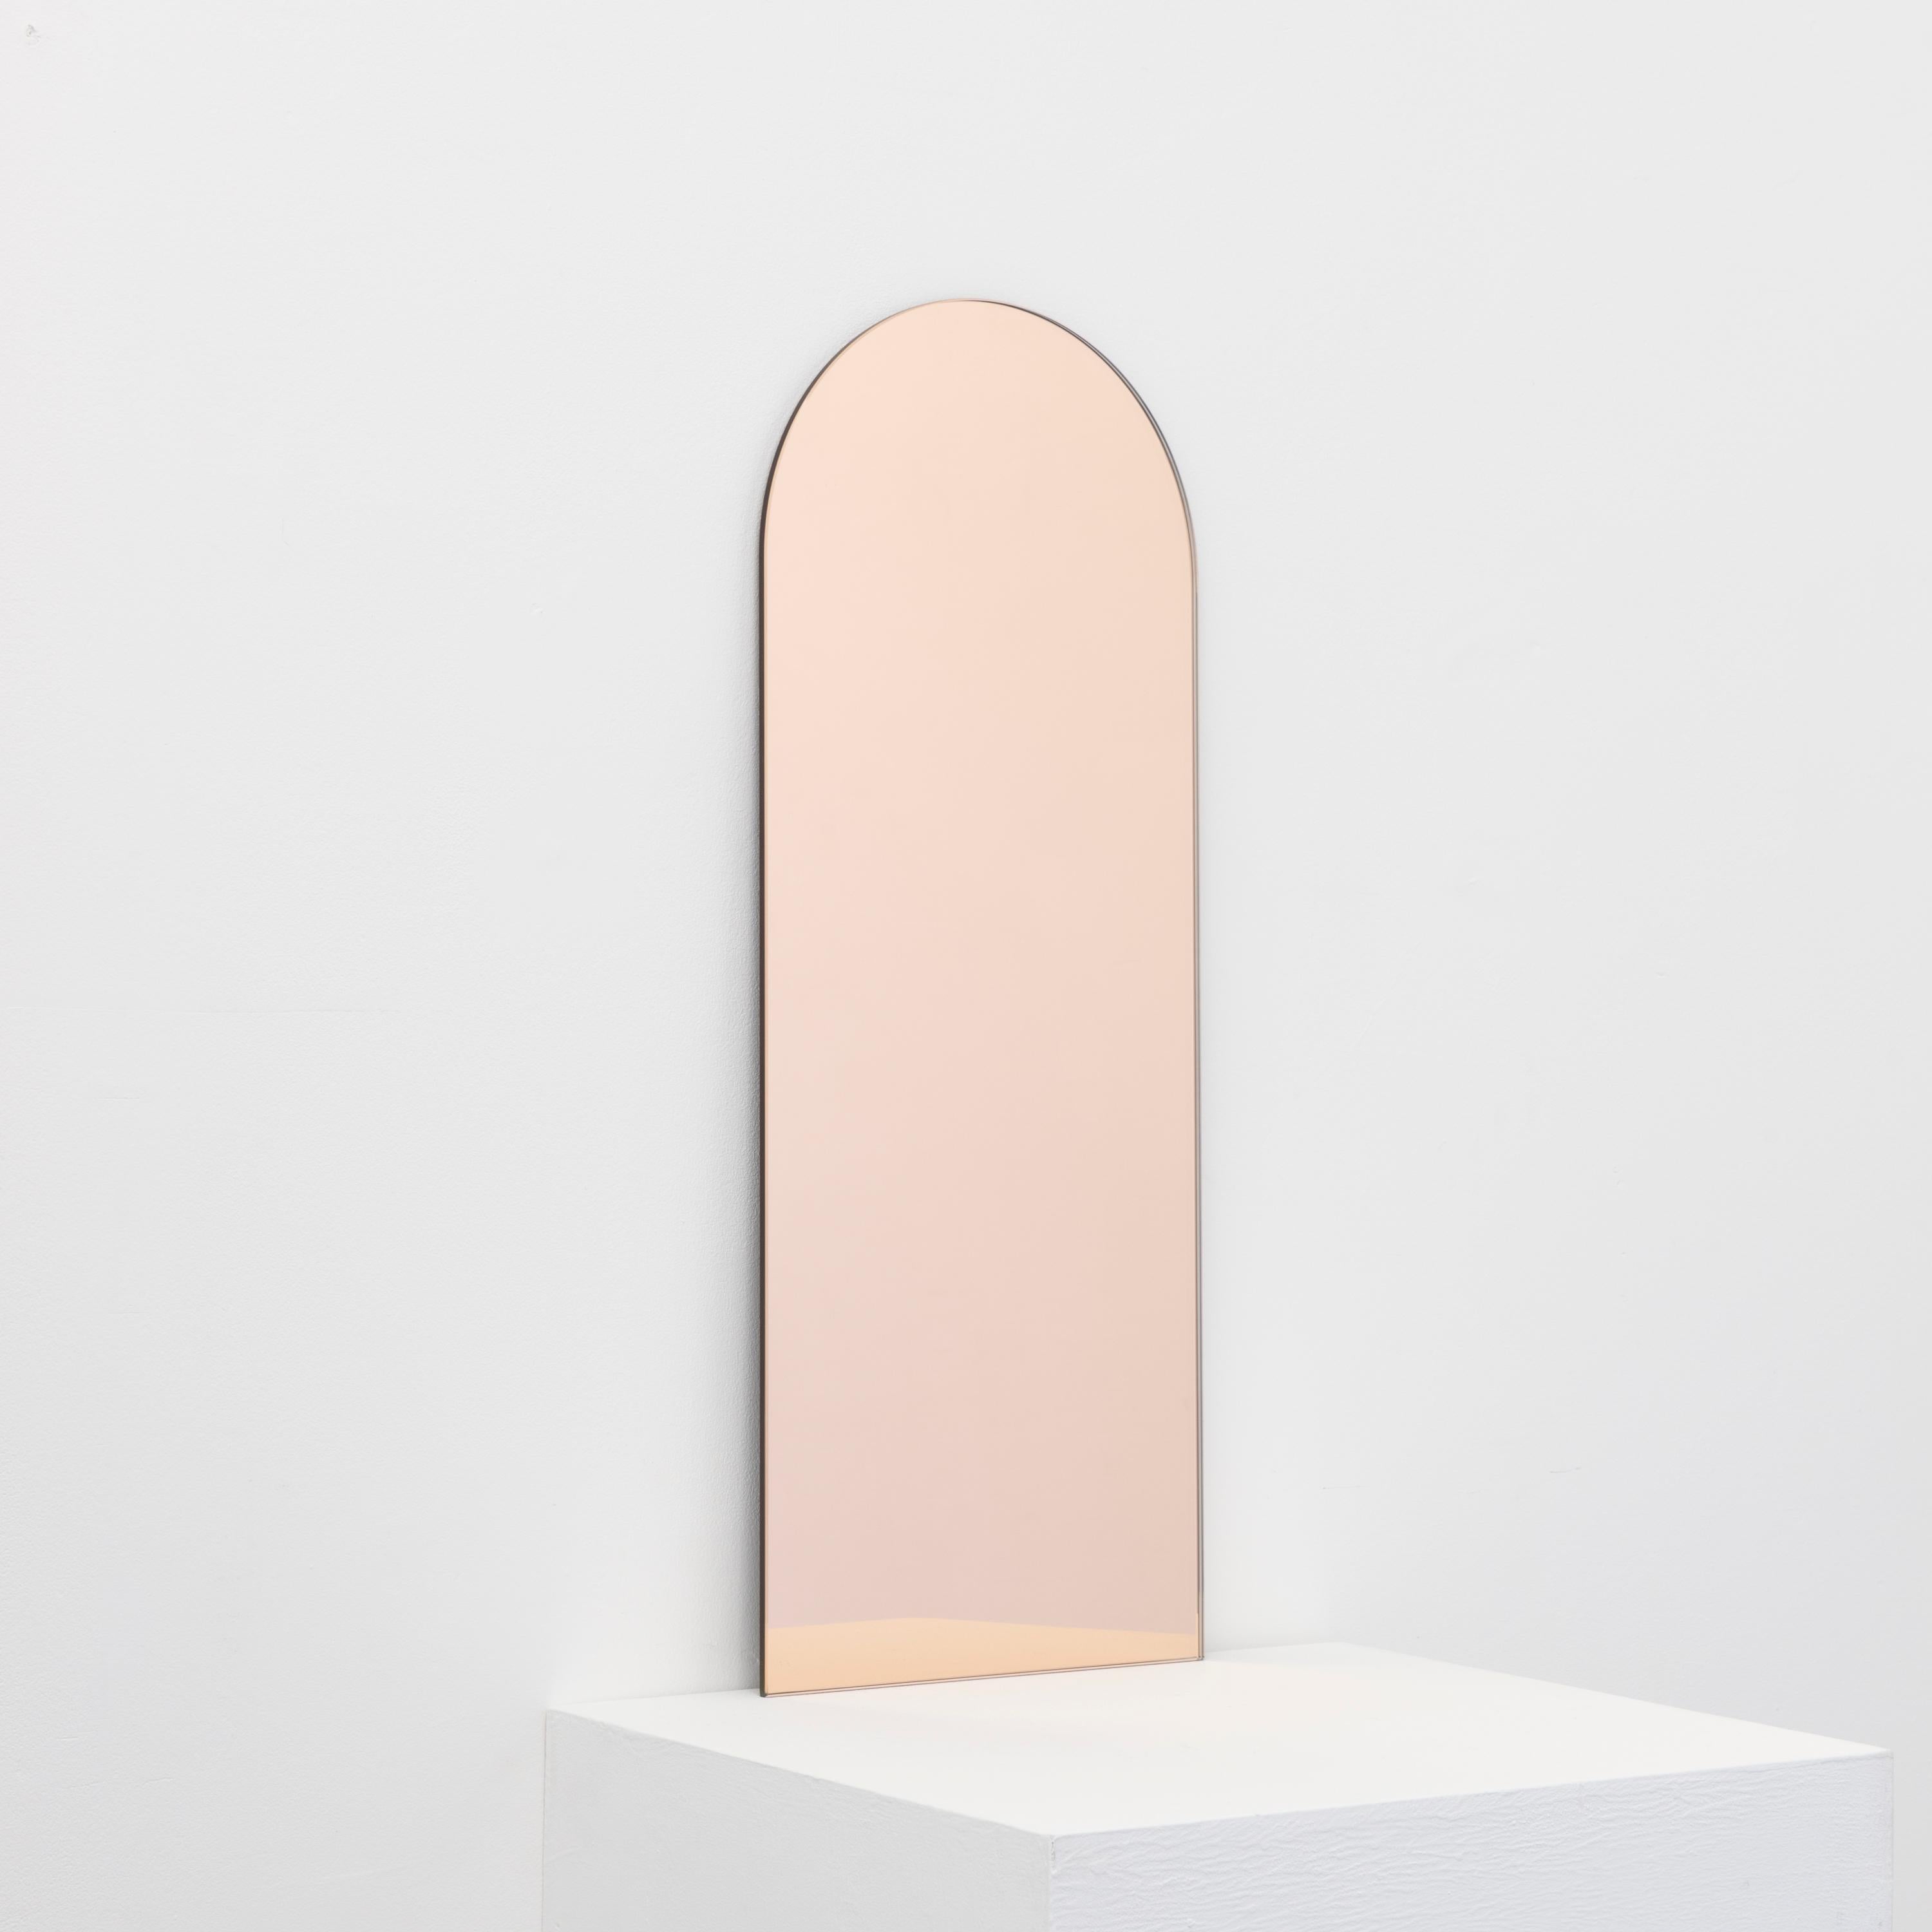 This item is available from stock.

Minimalist arch shaped rose gold tinted frameless mirror. Quality design that ensures the mirror sits perfectly parallel to the wall. Designed and made in London, UK.

Fitted with professional plates not visible